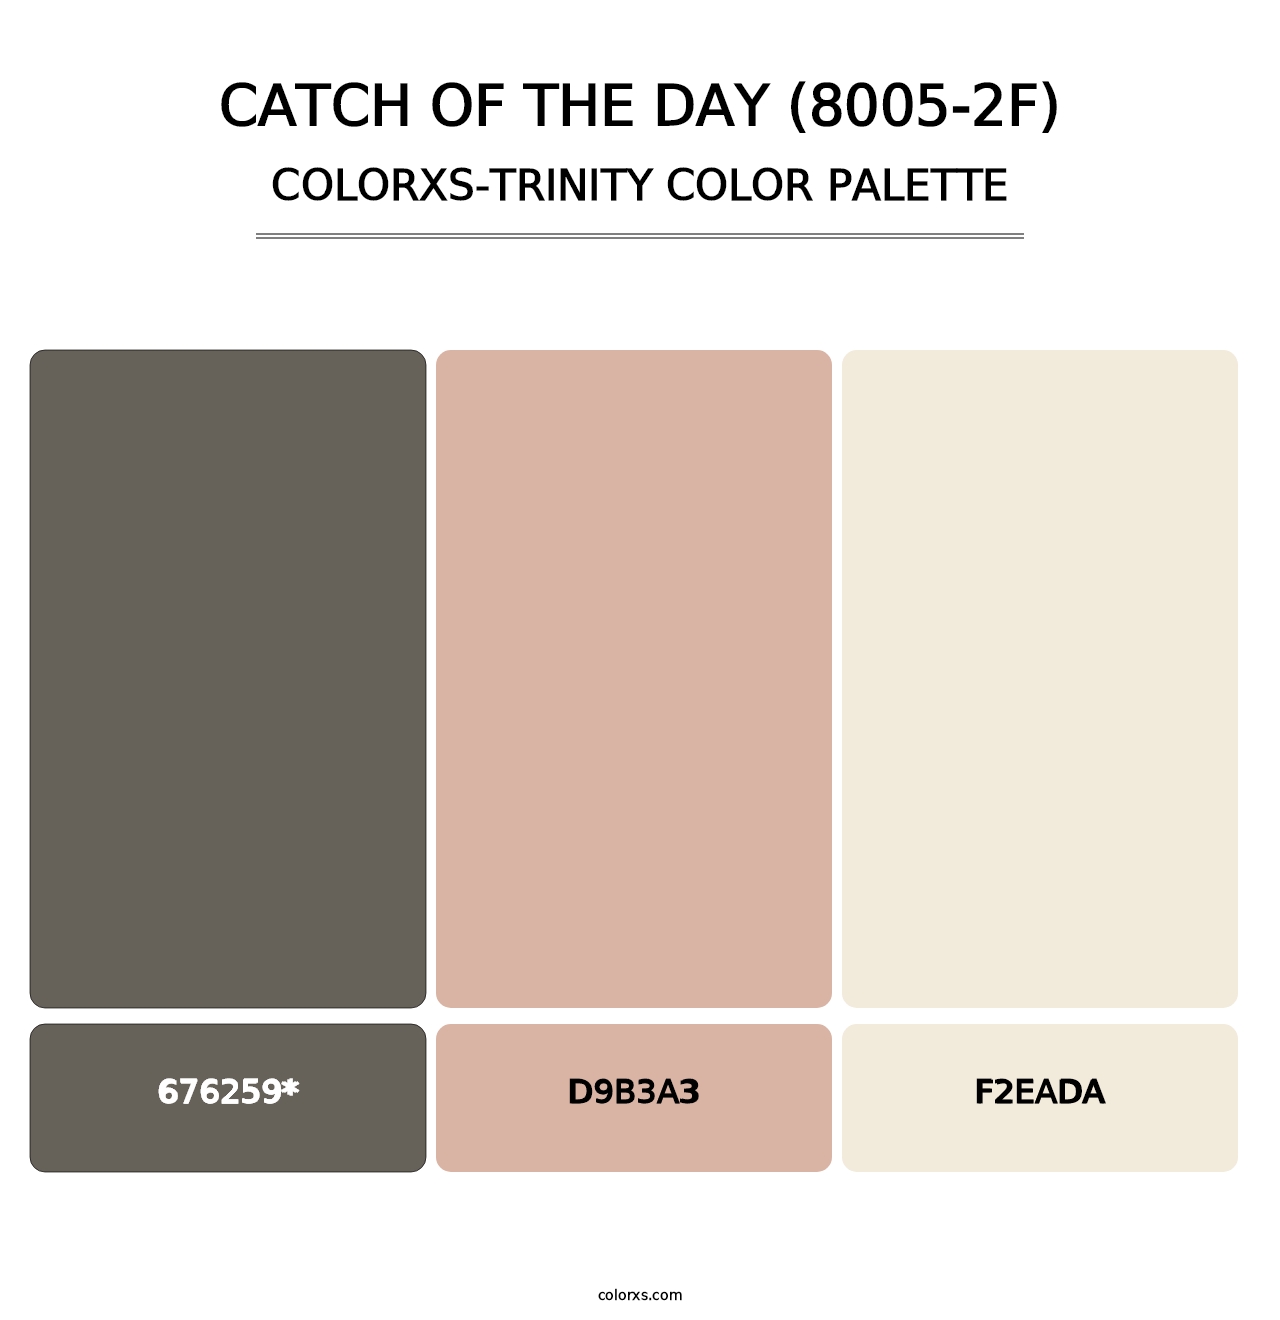 Catch of the Day (8005-2F) - Colorxs Trinity Palette